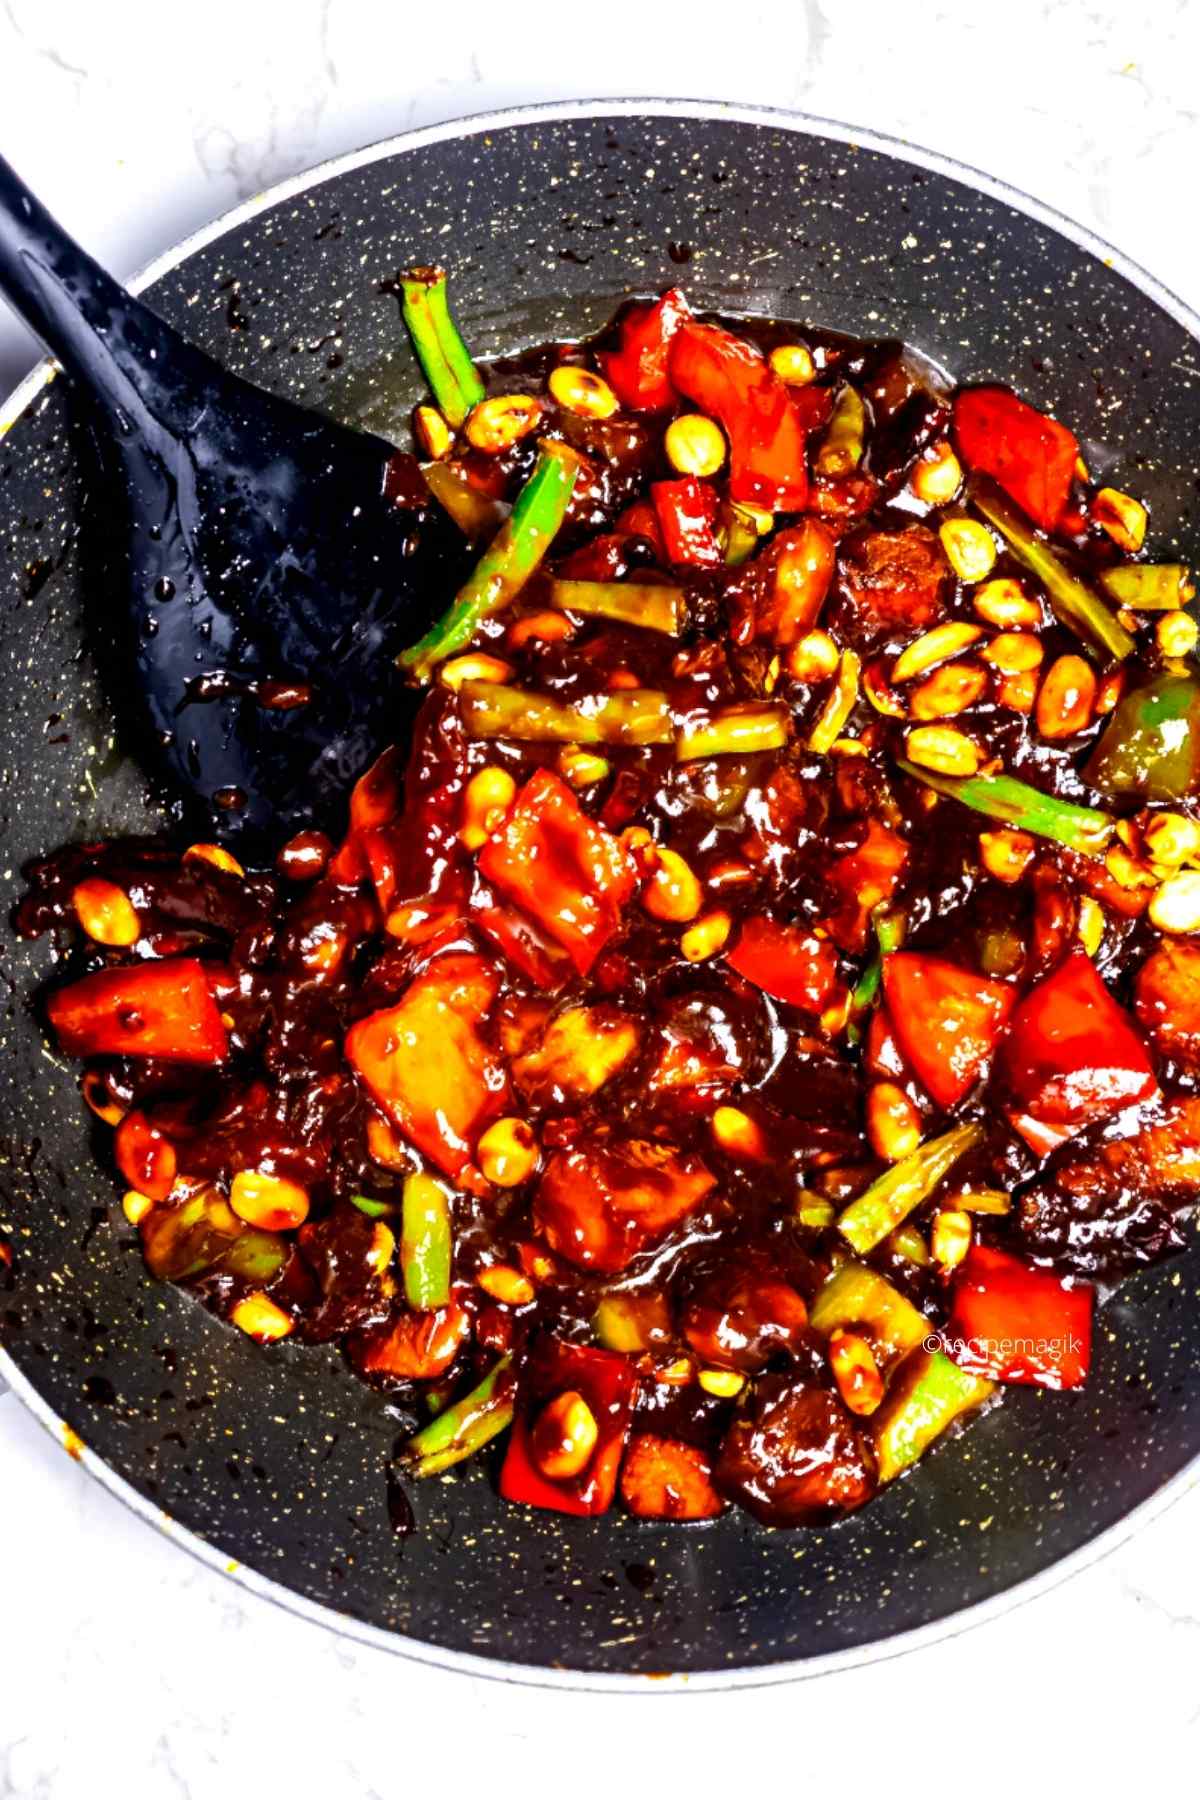 Kung Pao Chicken in a wok